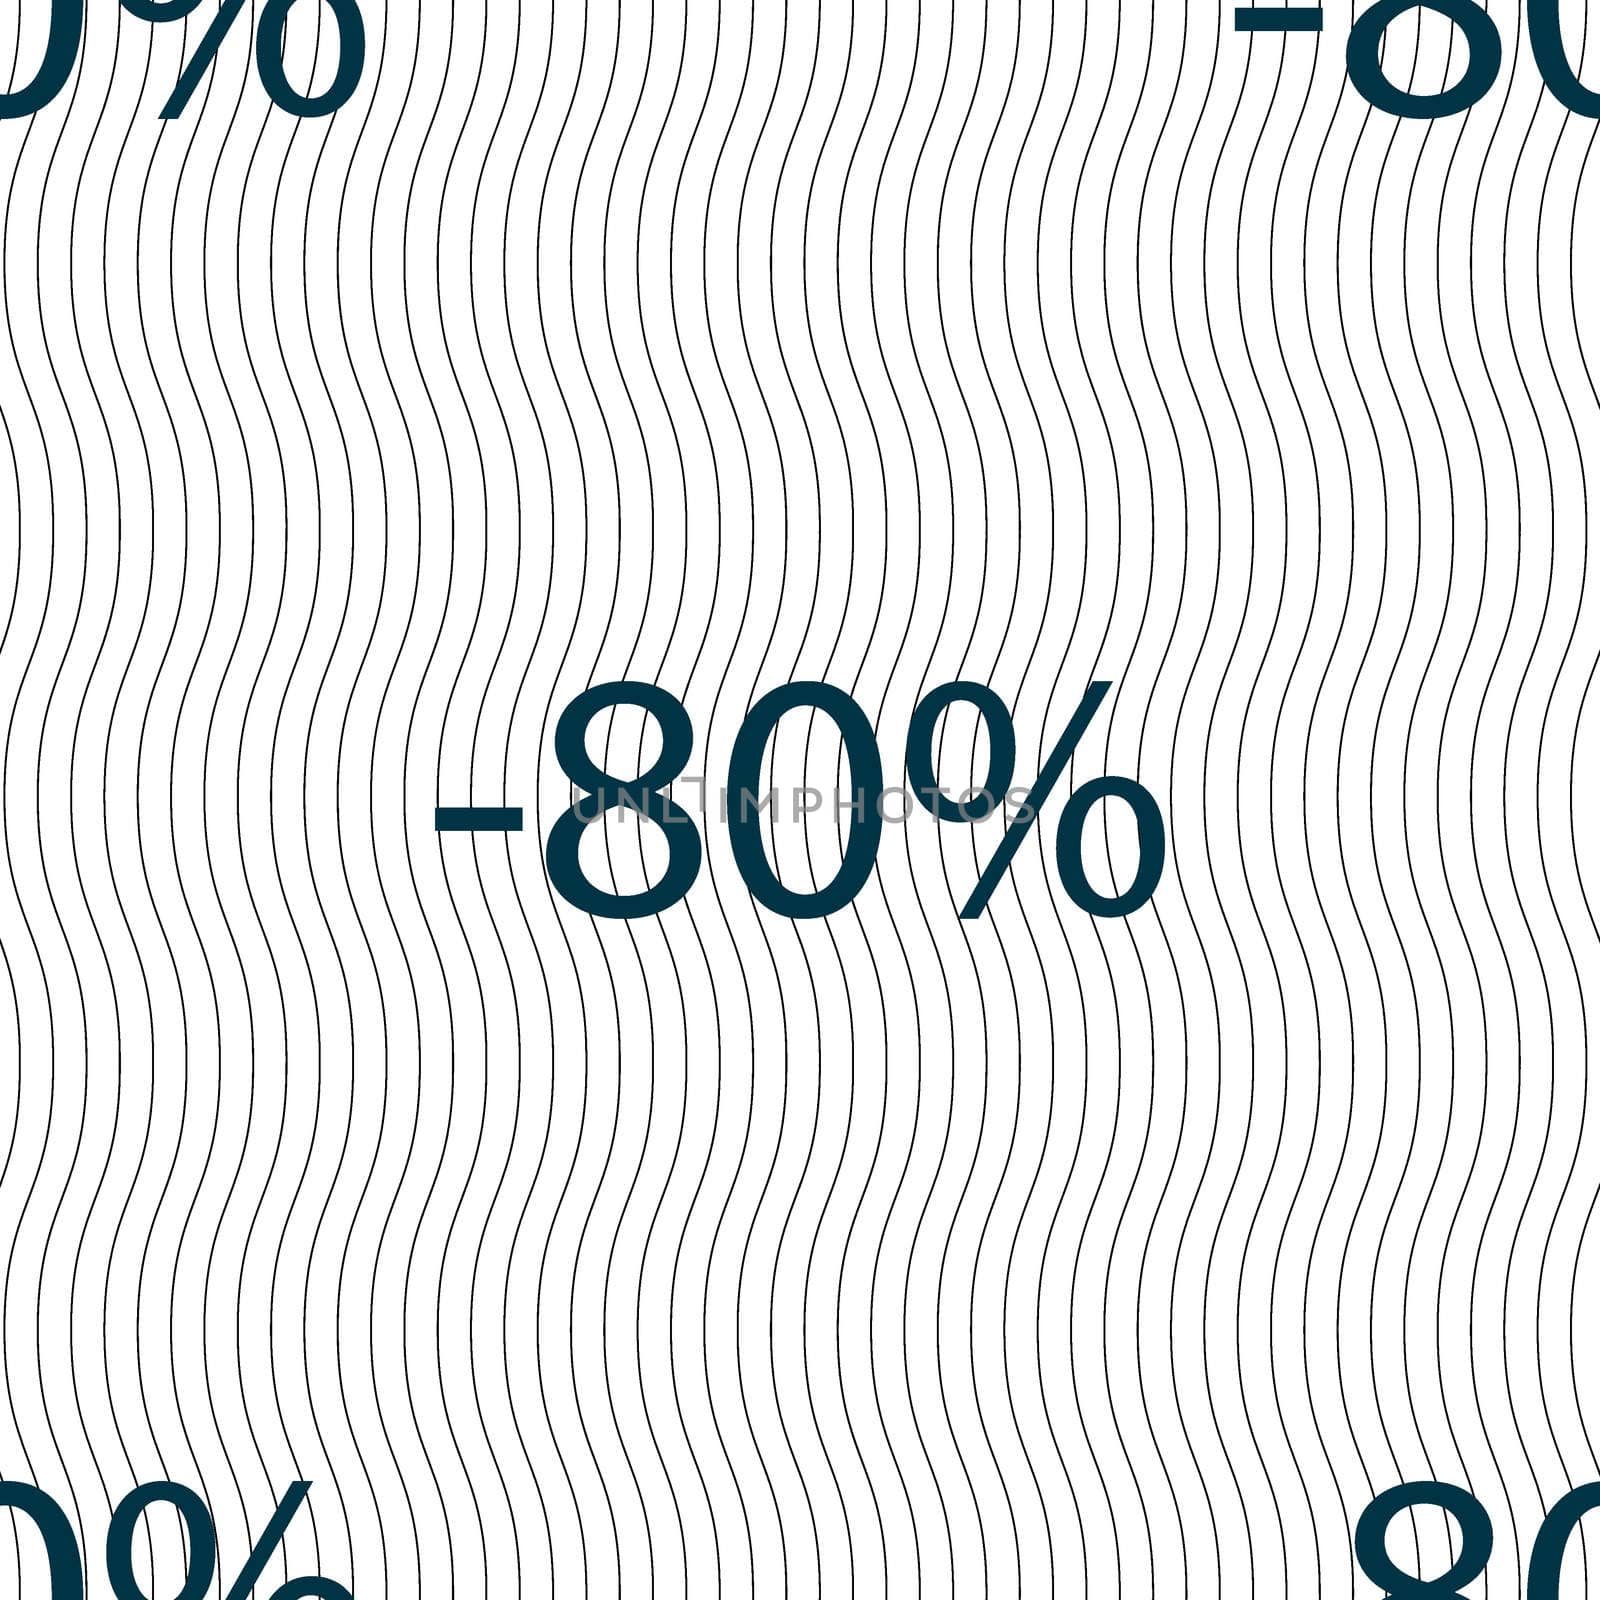 80 percent discount sign icon. Sale symbol. Special offer label. Seamless pattern with geometric texture. illustration